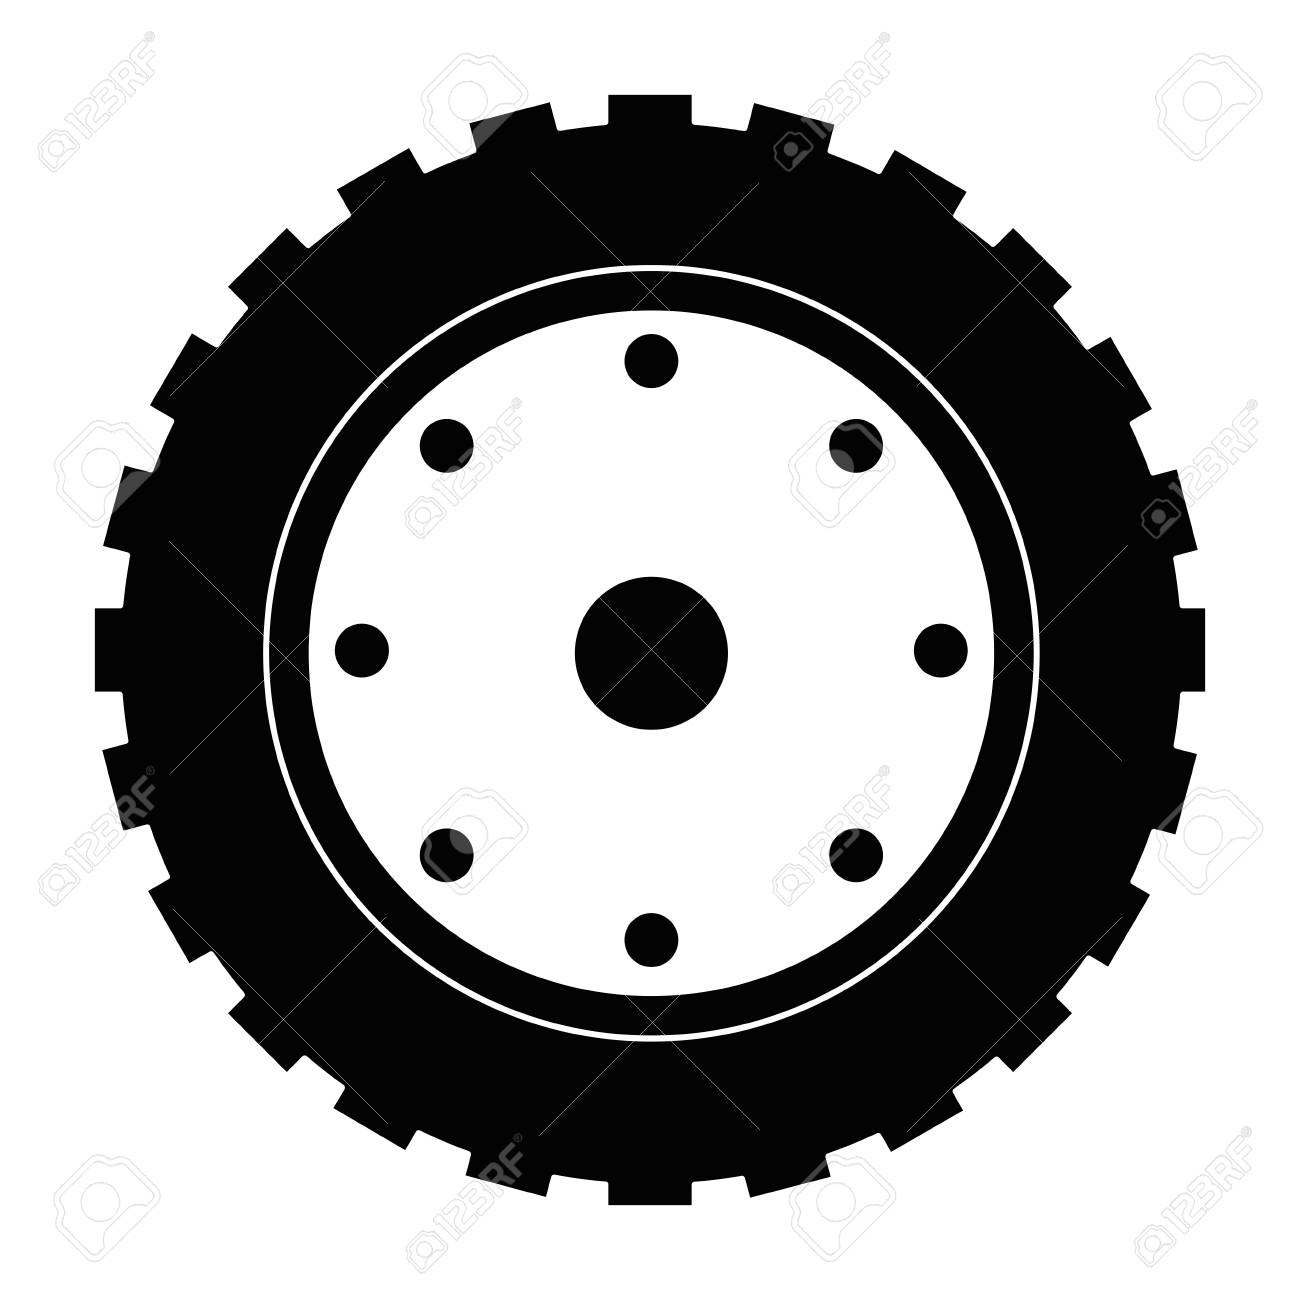 Tractor tire isolated.